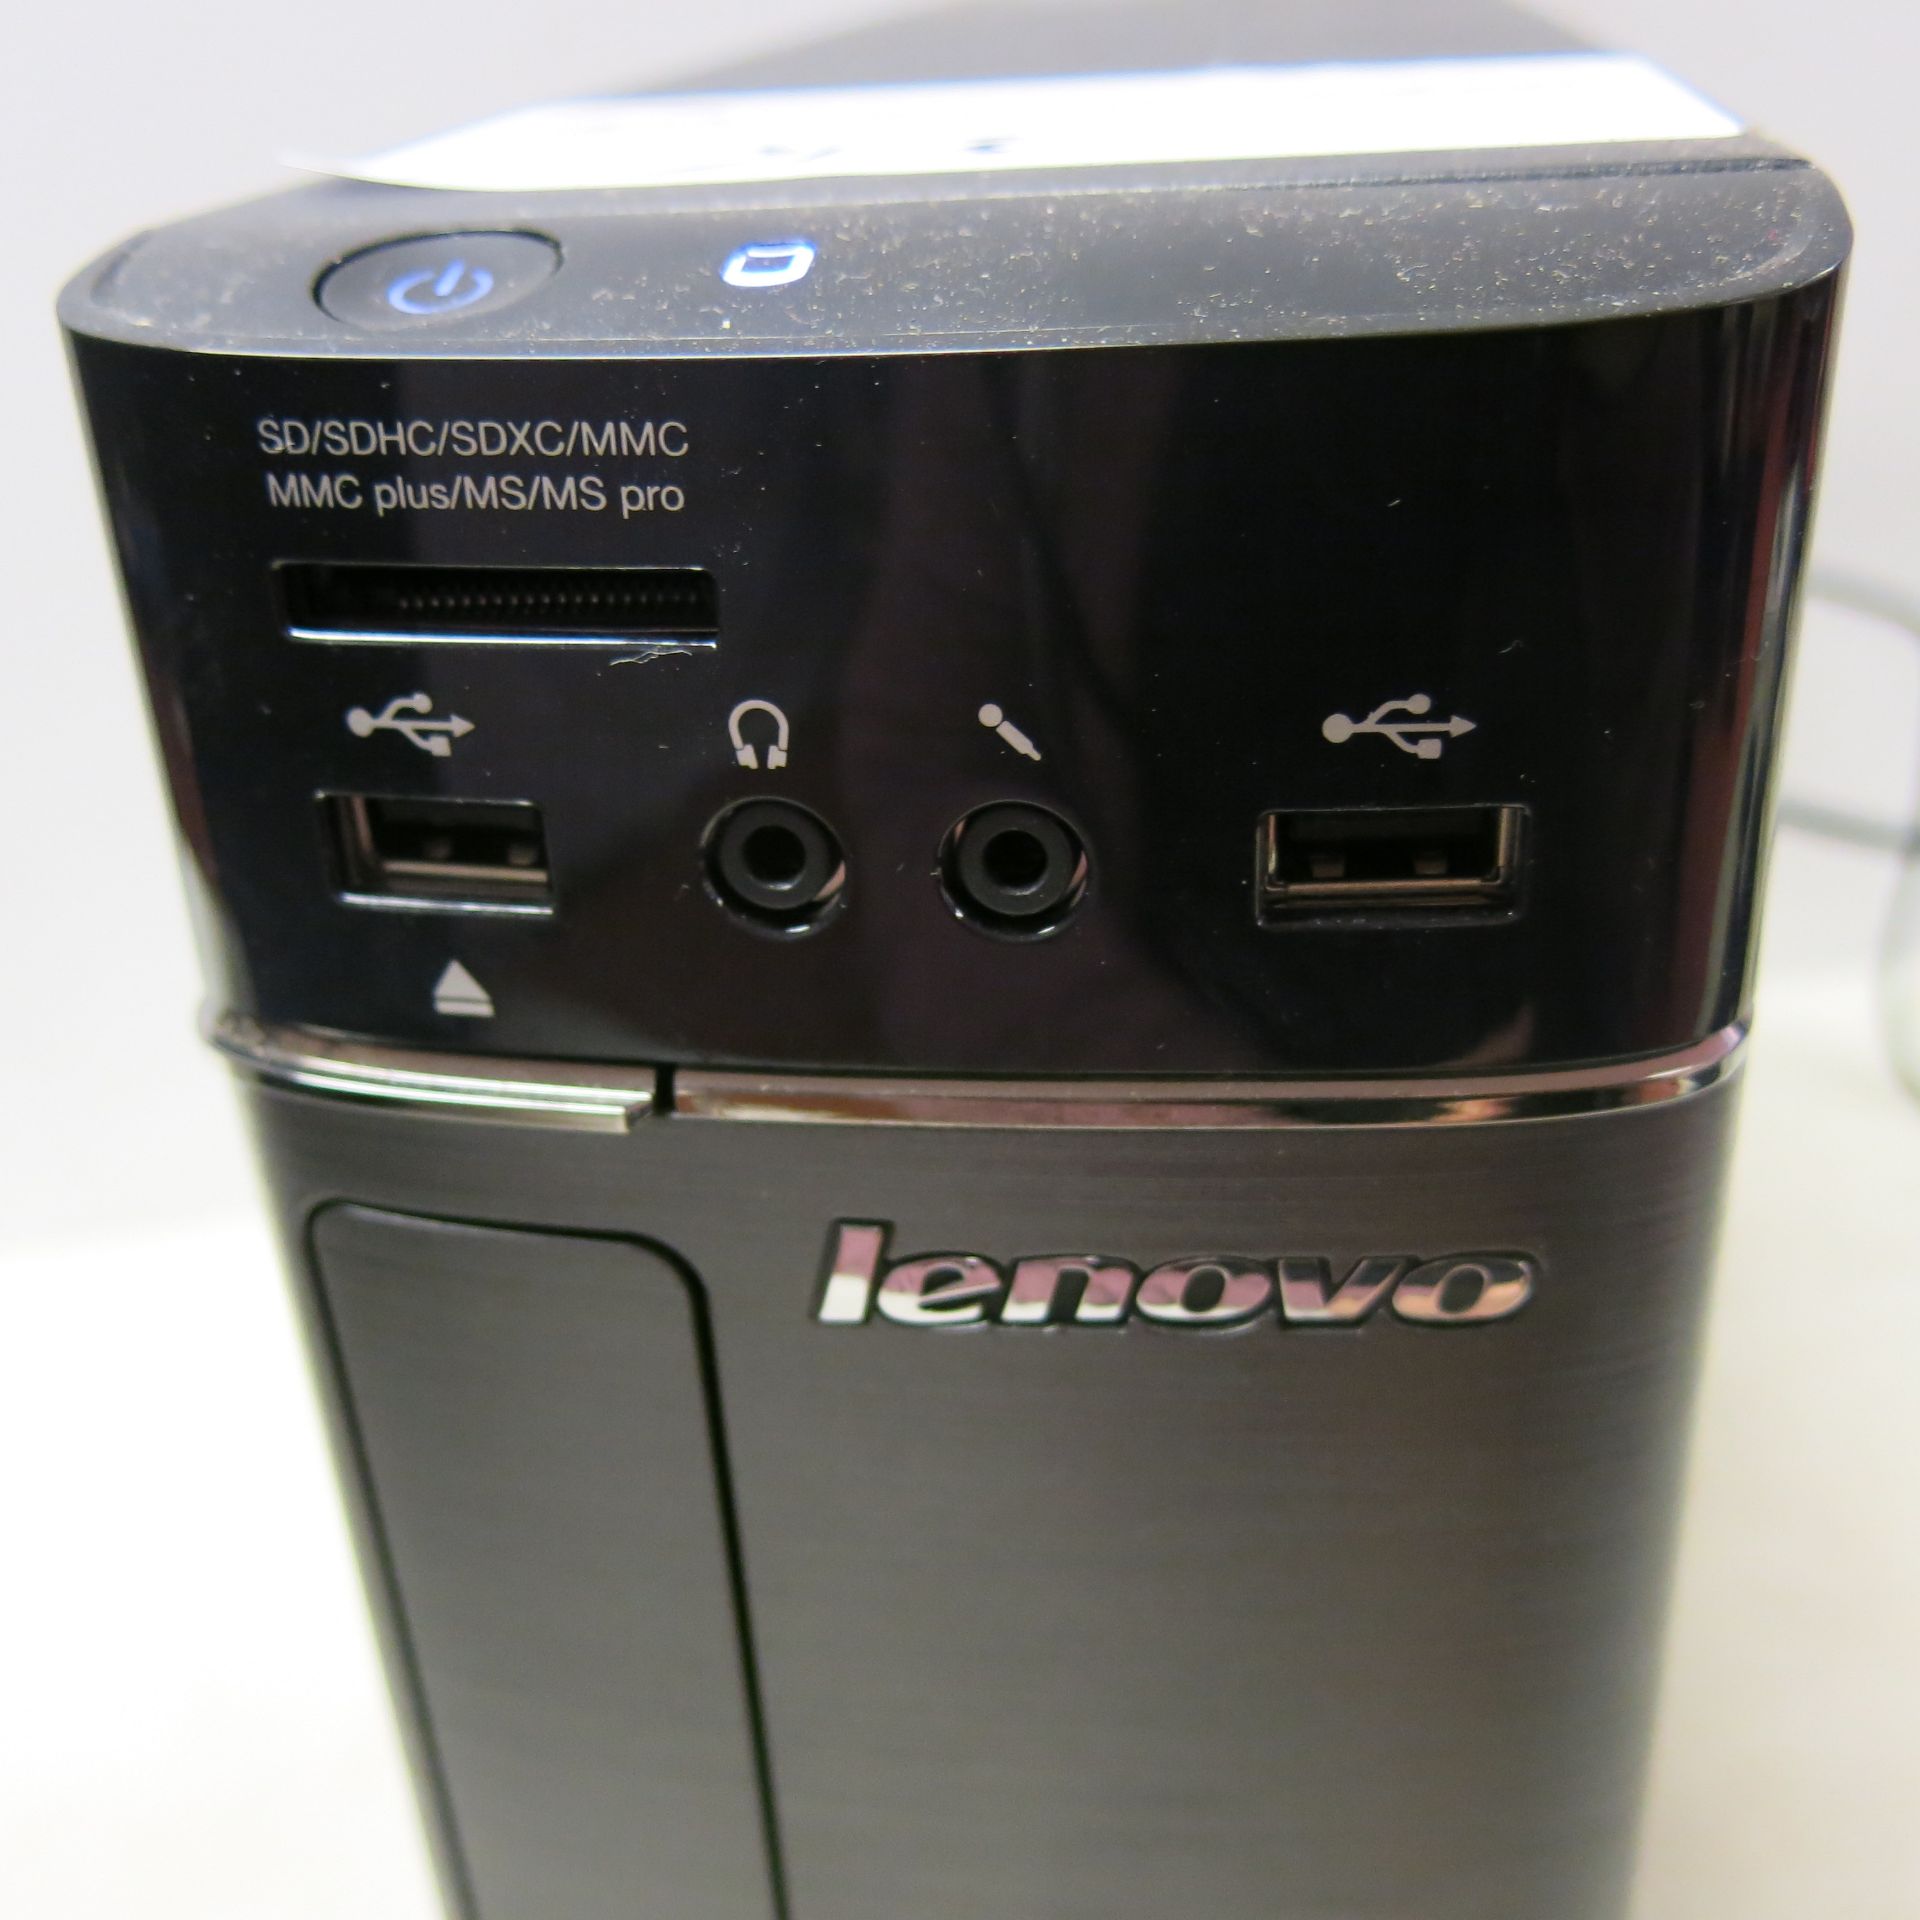 Lenovo 2561 PC, Running Windows 10 Home. Intel Core i3-2120, CPU @ 3.3Ghz, 4GB Ram, 439GB HDD. Comes - Image 2 of 3